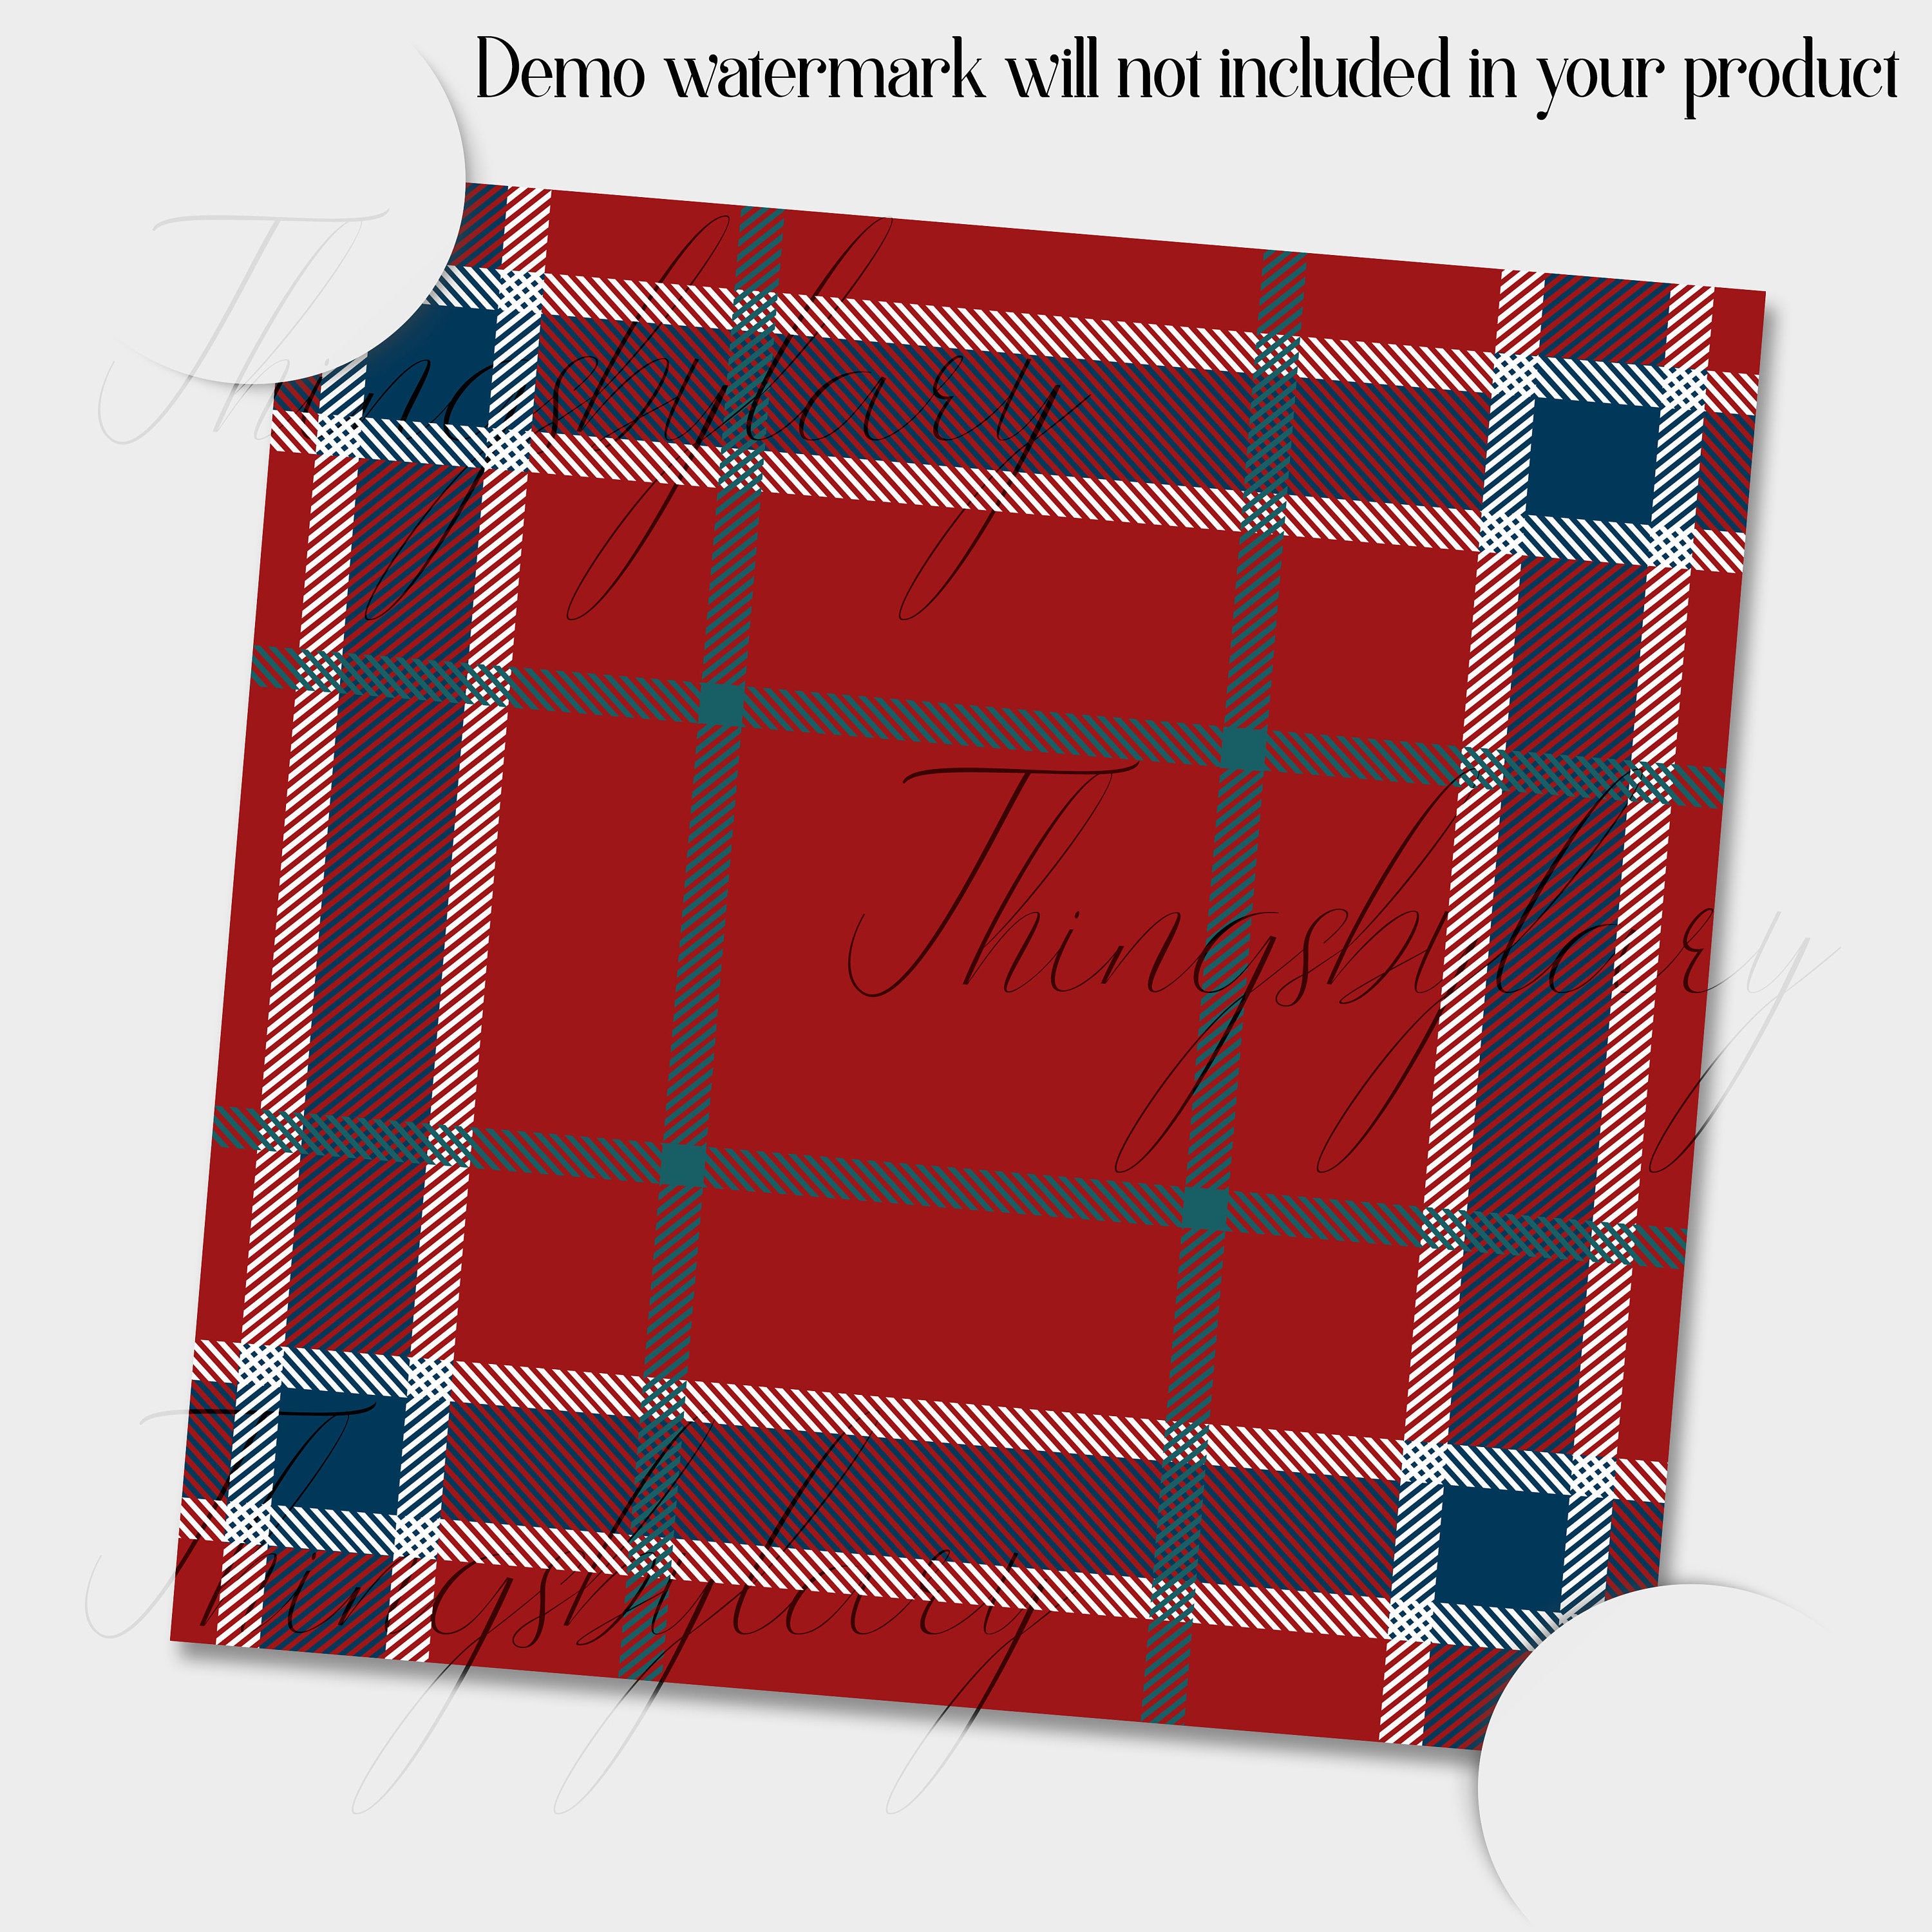 24 Orange and Drank Green  Plaid Digital Papers in 12inch 300 Dpi Instant Download Commercial Use, Scrapbook Princess, Tartan, Gingham Check